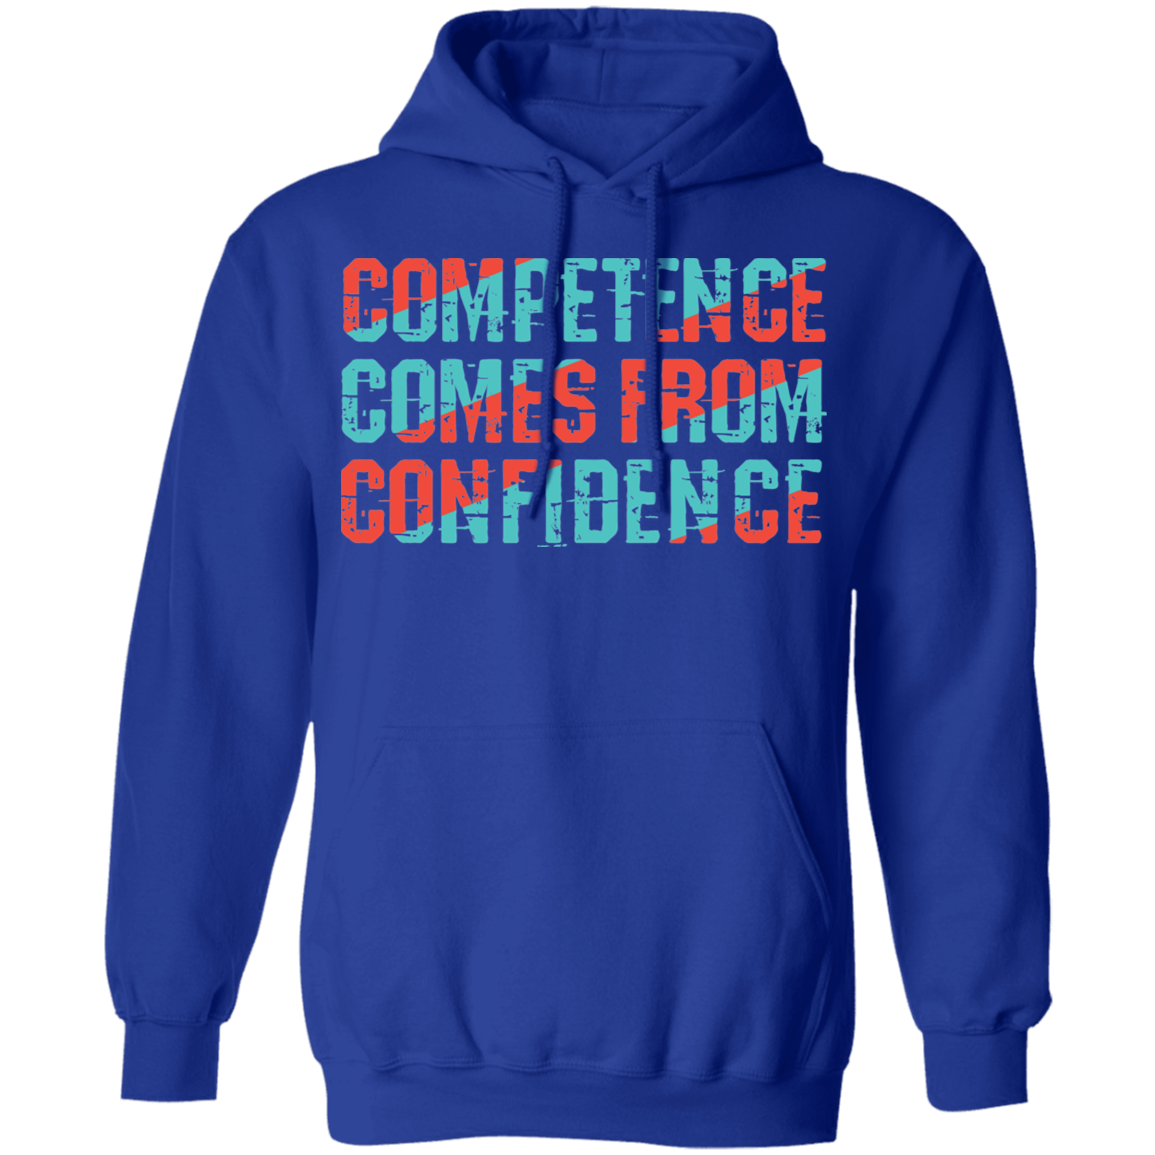 Competence comes from Confidence Hoodie